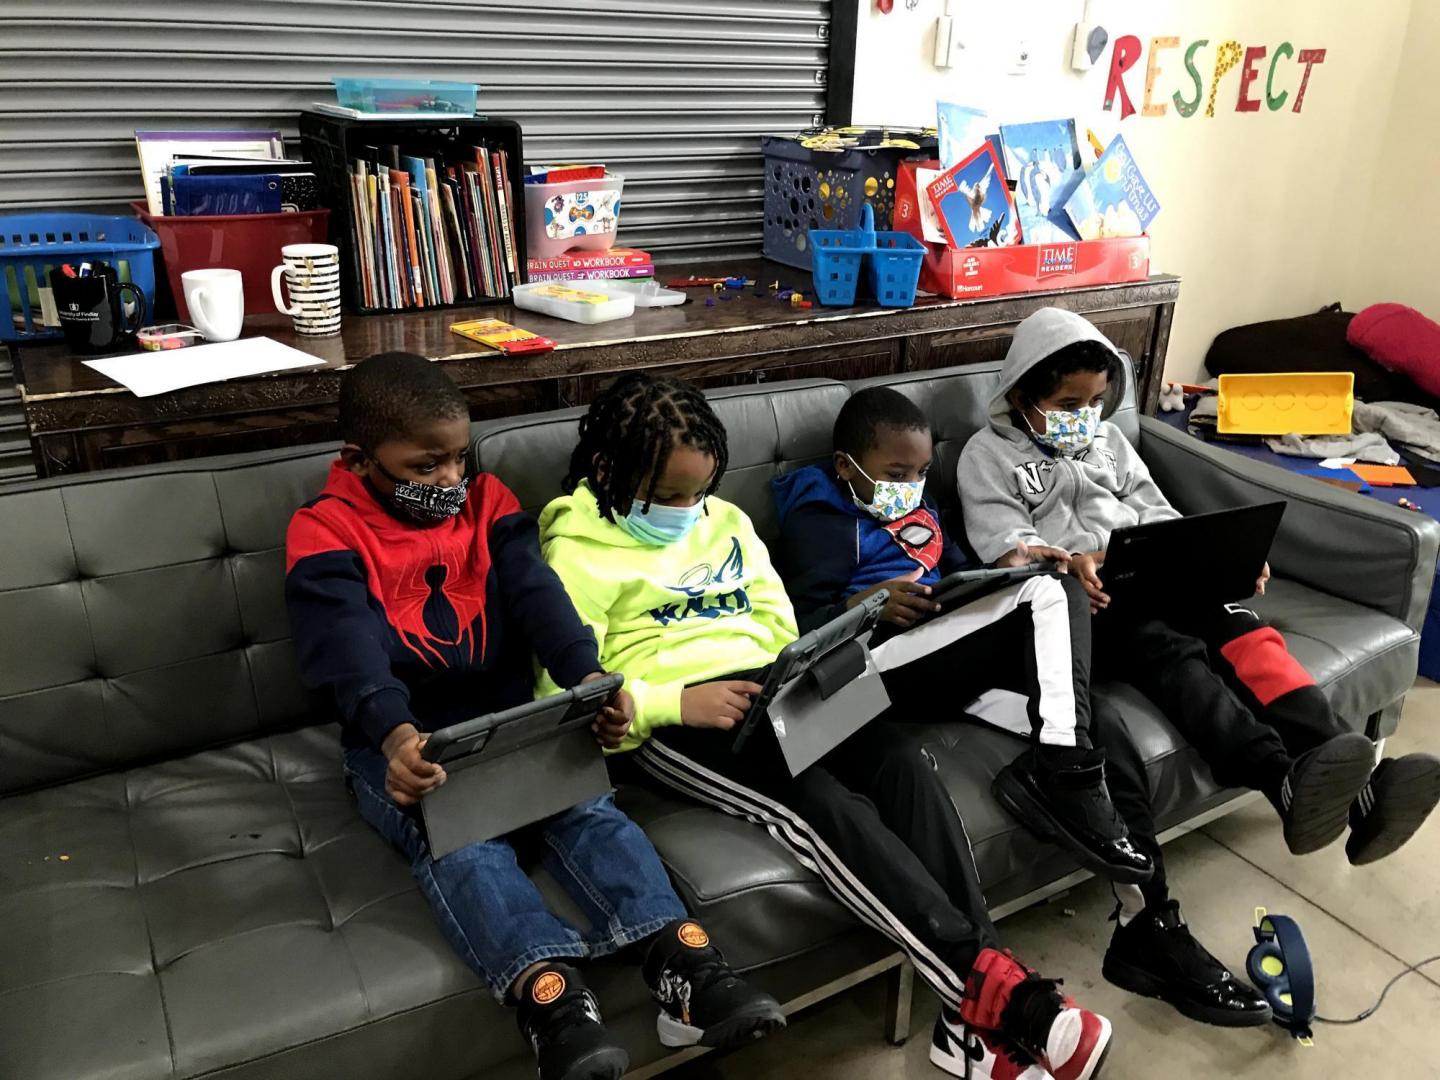 Four kids sit on a couch wearing face masks and looking at tablets